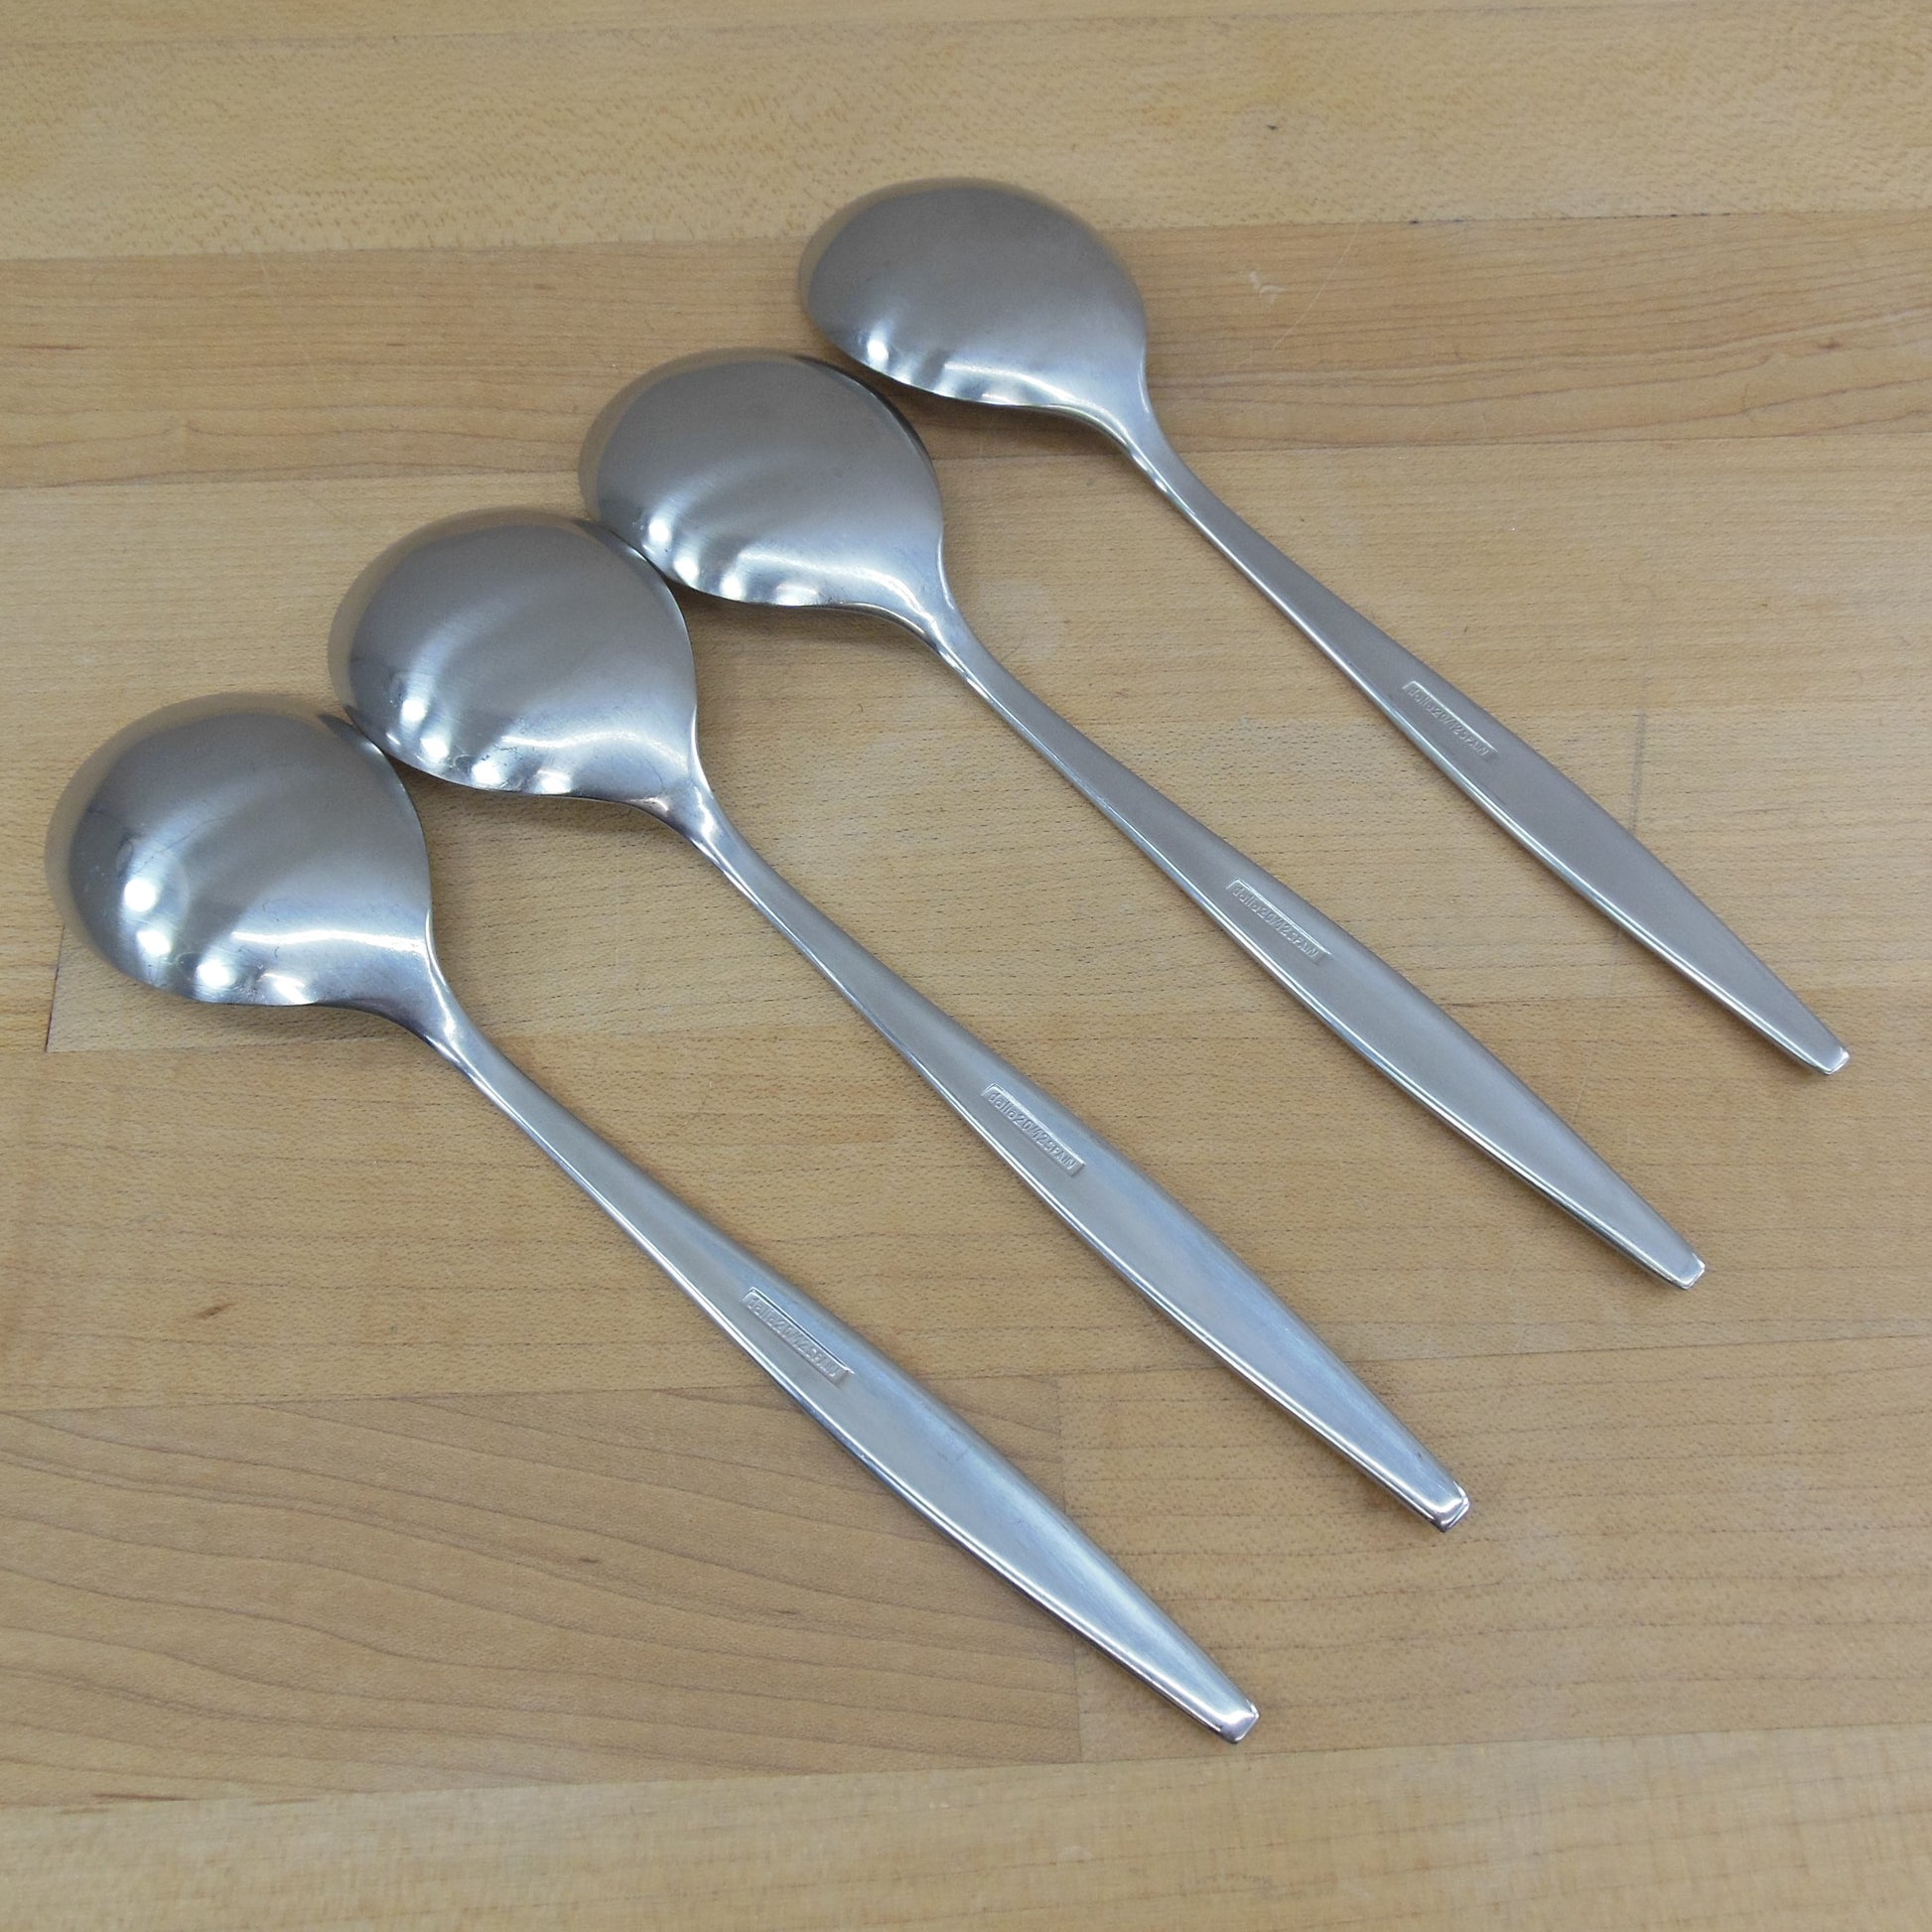 Dalia Spain Braque Modernist Stainless Flatware - 4 Set Place/Soup Spoon Used